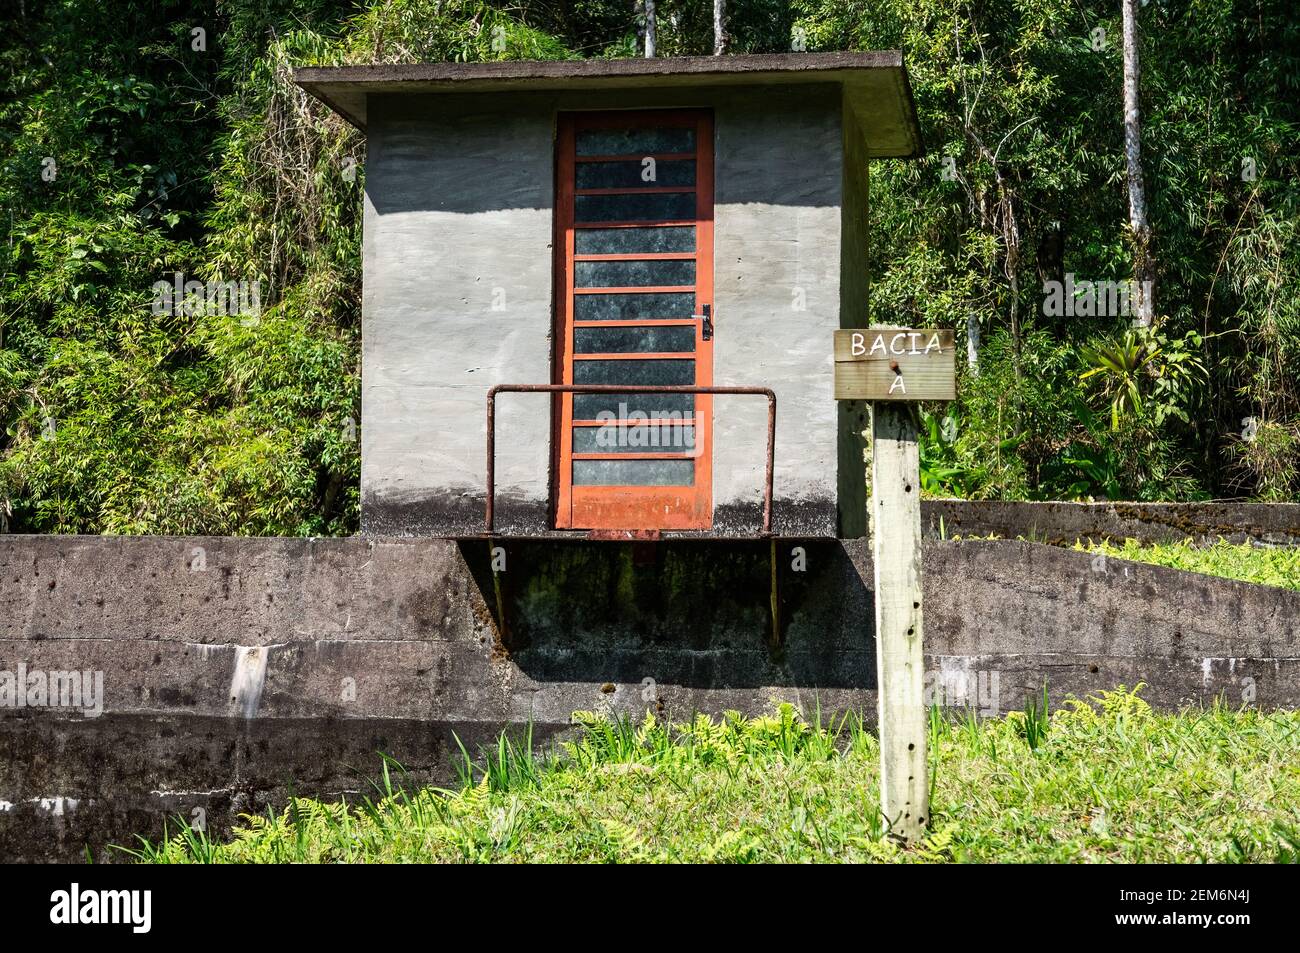 Housing building of hydrological station A. Station used for measure the amount of water produced by the forest of Serra do Mar estate park. Stock Photo